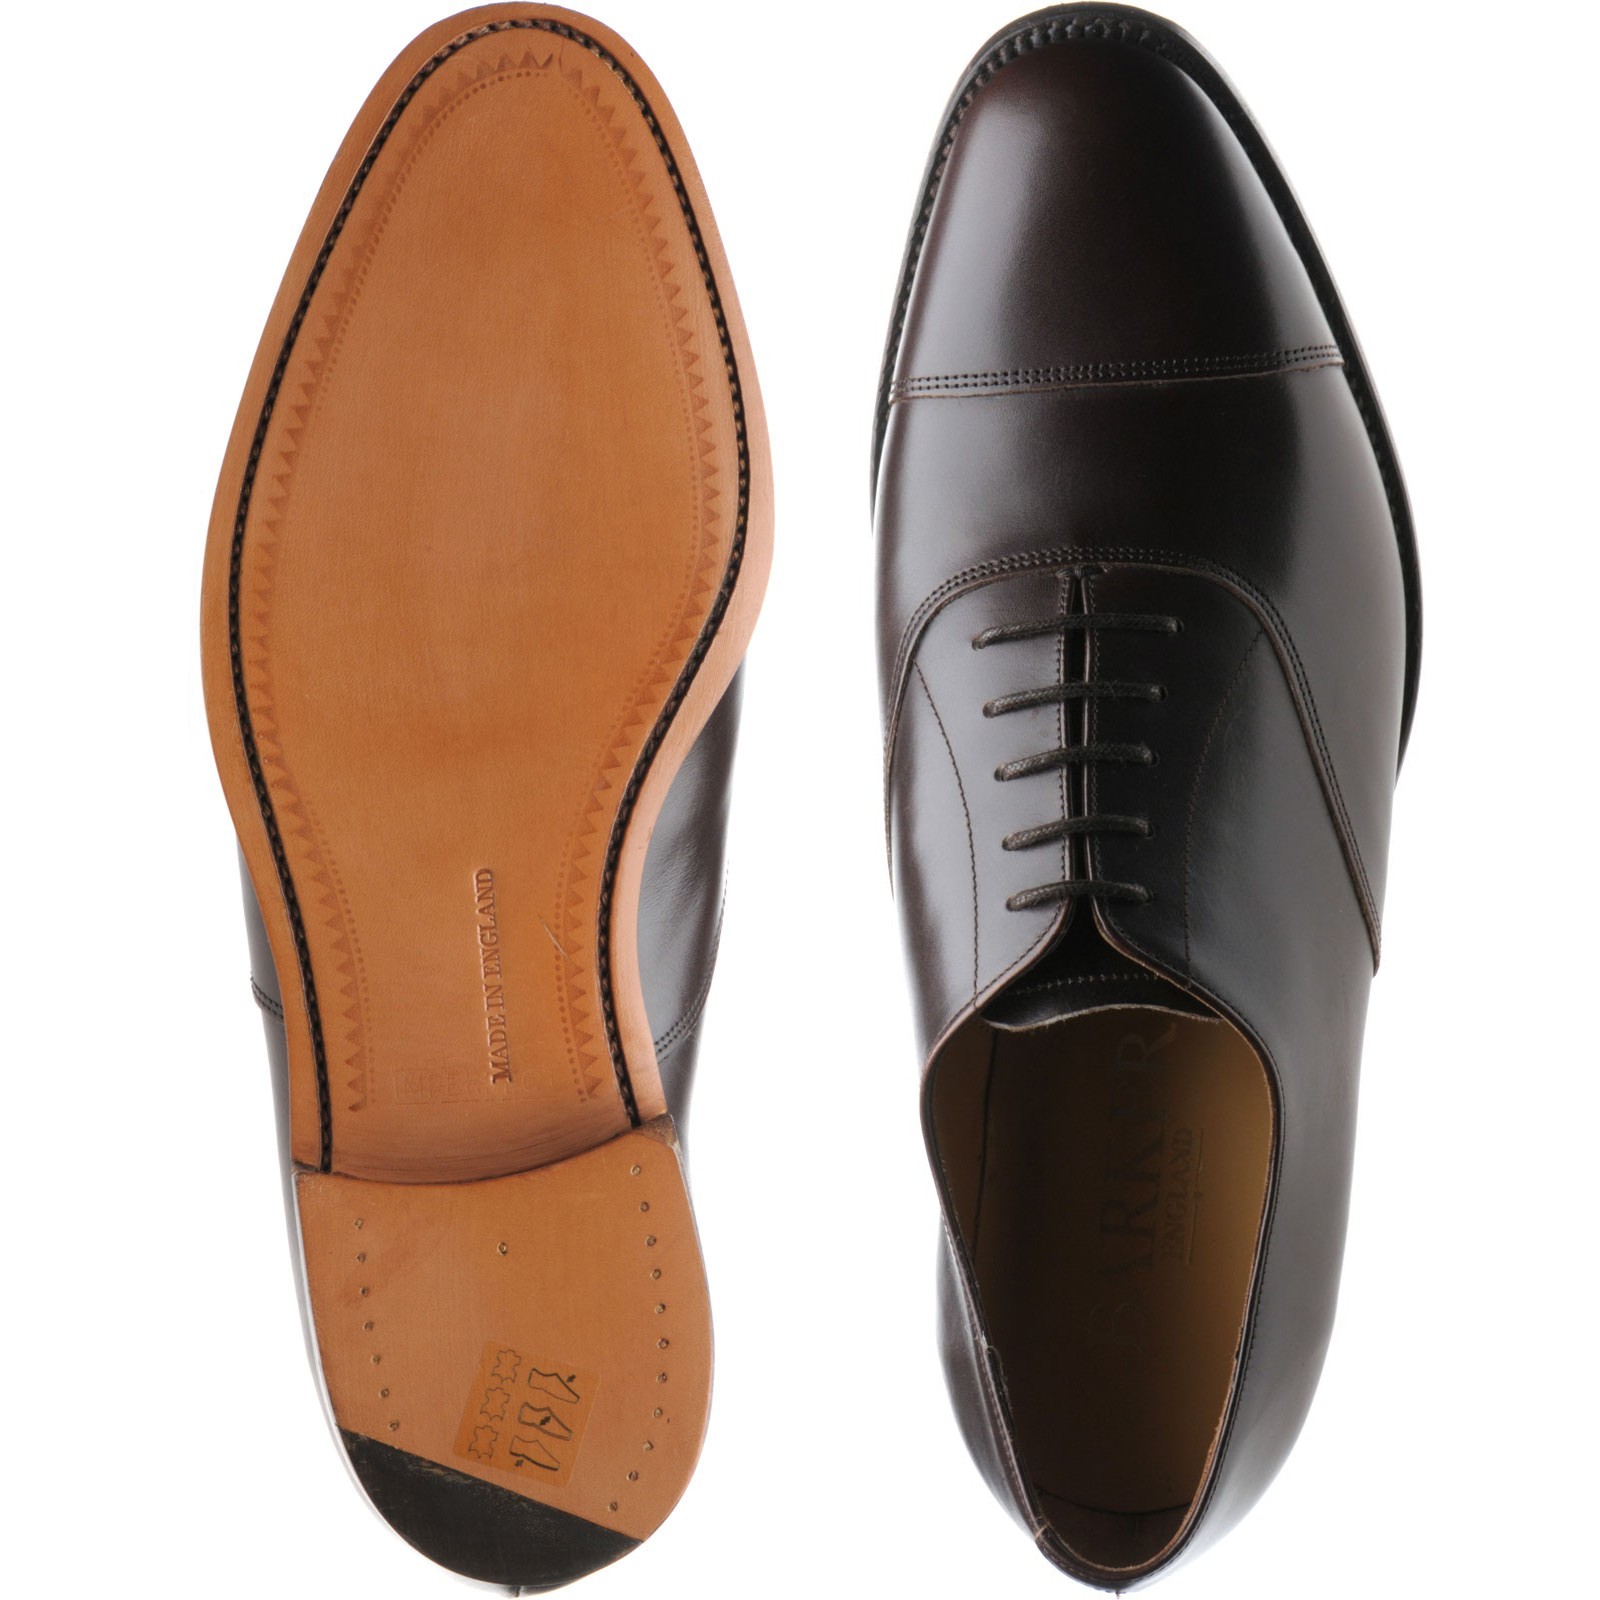 Barker shoes | Barker Factory Seconds | 4071GW10 in Brown Calf at ...